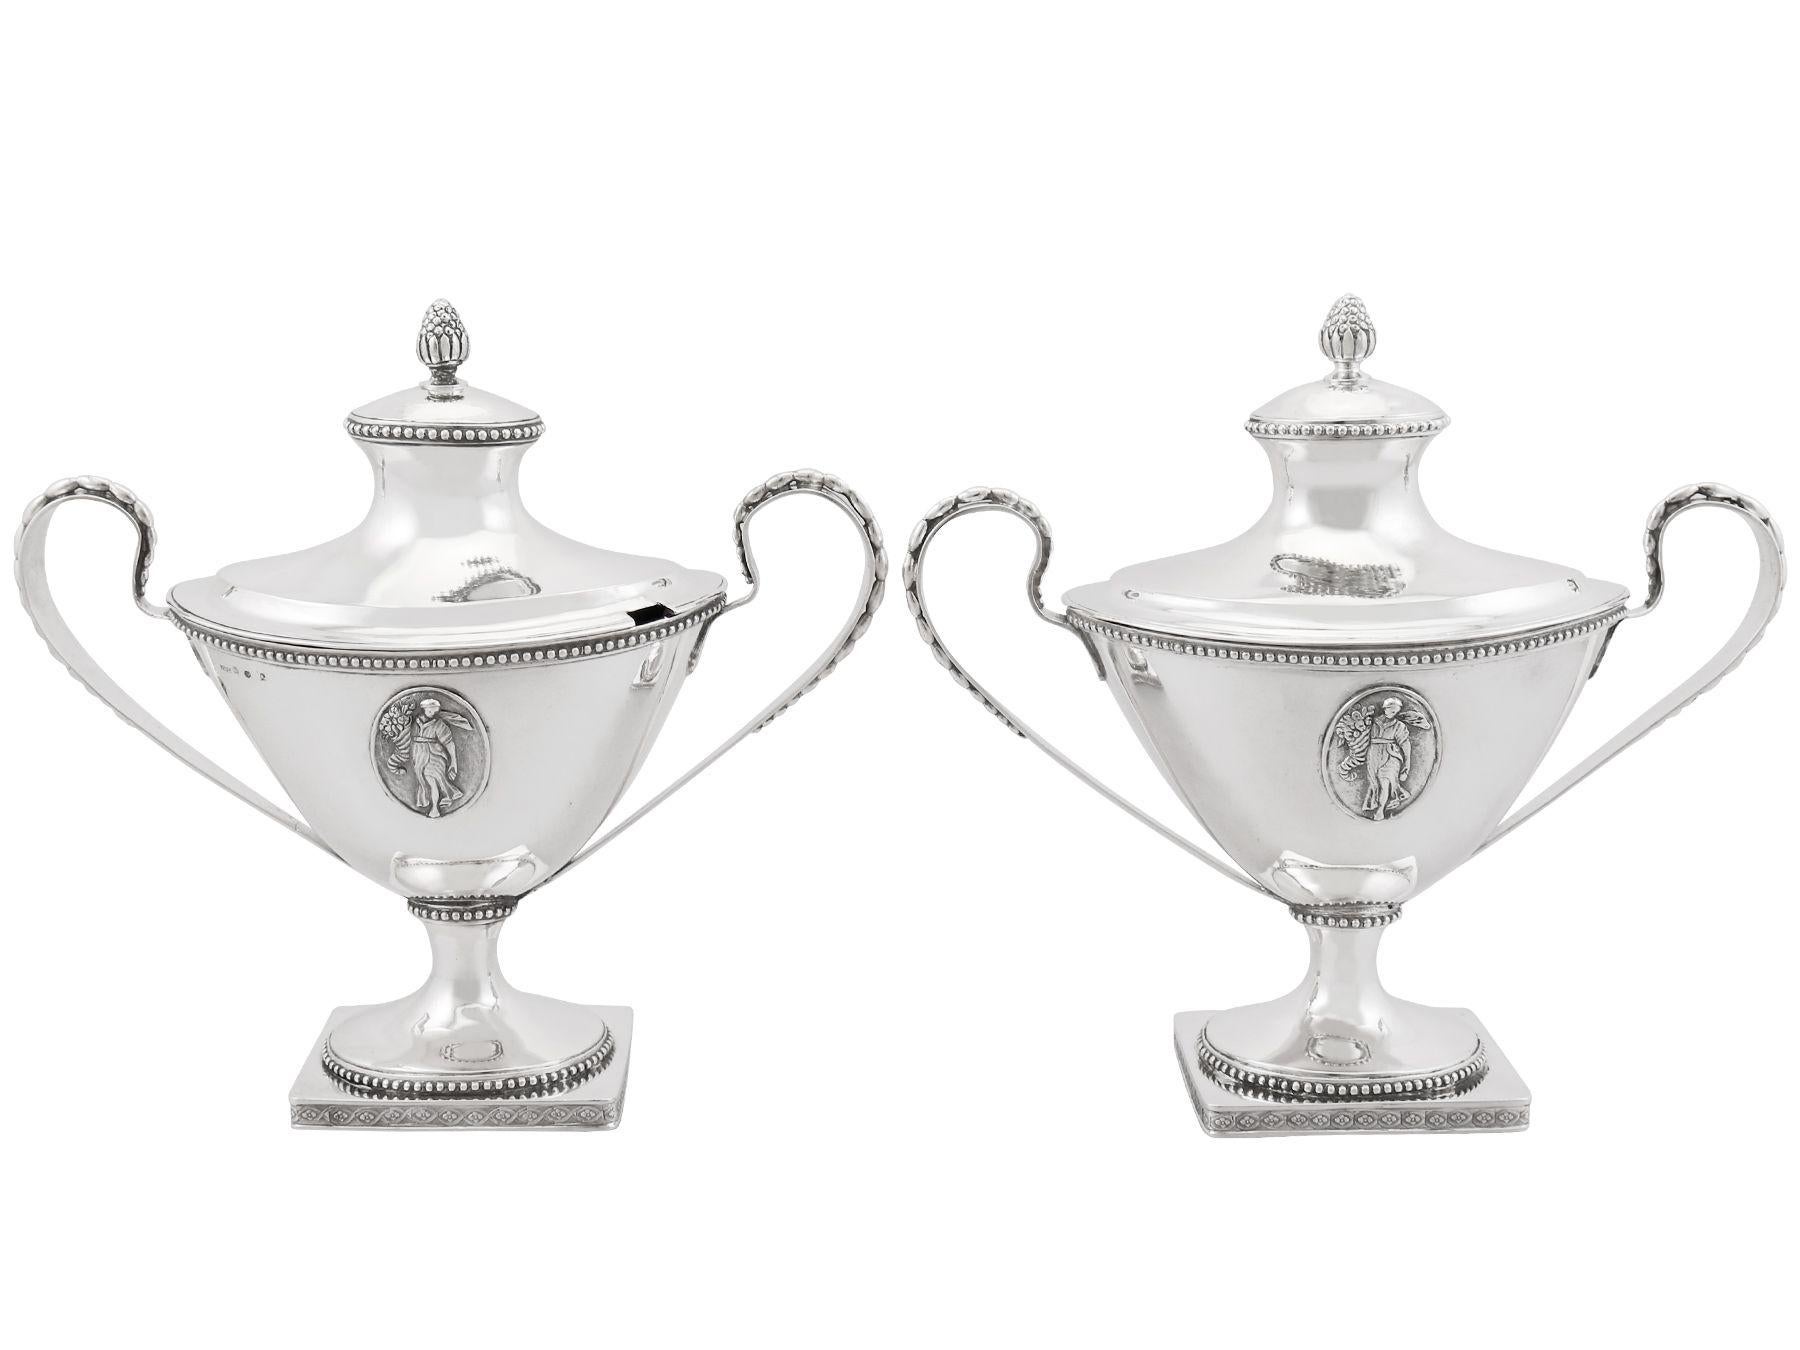 An exceptional, fine and impressive pair of antique Swedish silver sauce tureens; an addition to our 18th century silverware collection

These exceptional antique Swedish silver sauce tureens have a plain oval shaped form onto a plain oval